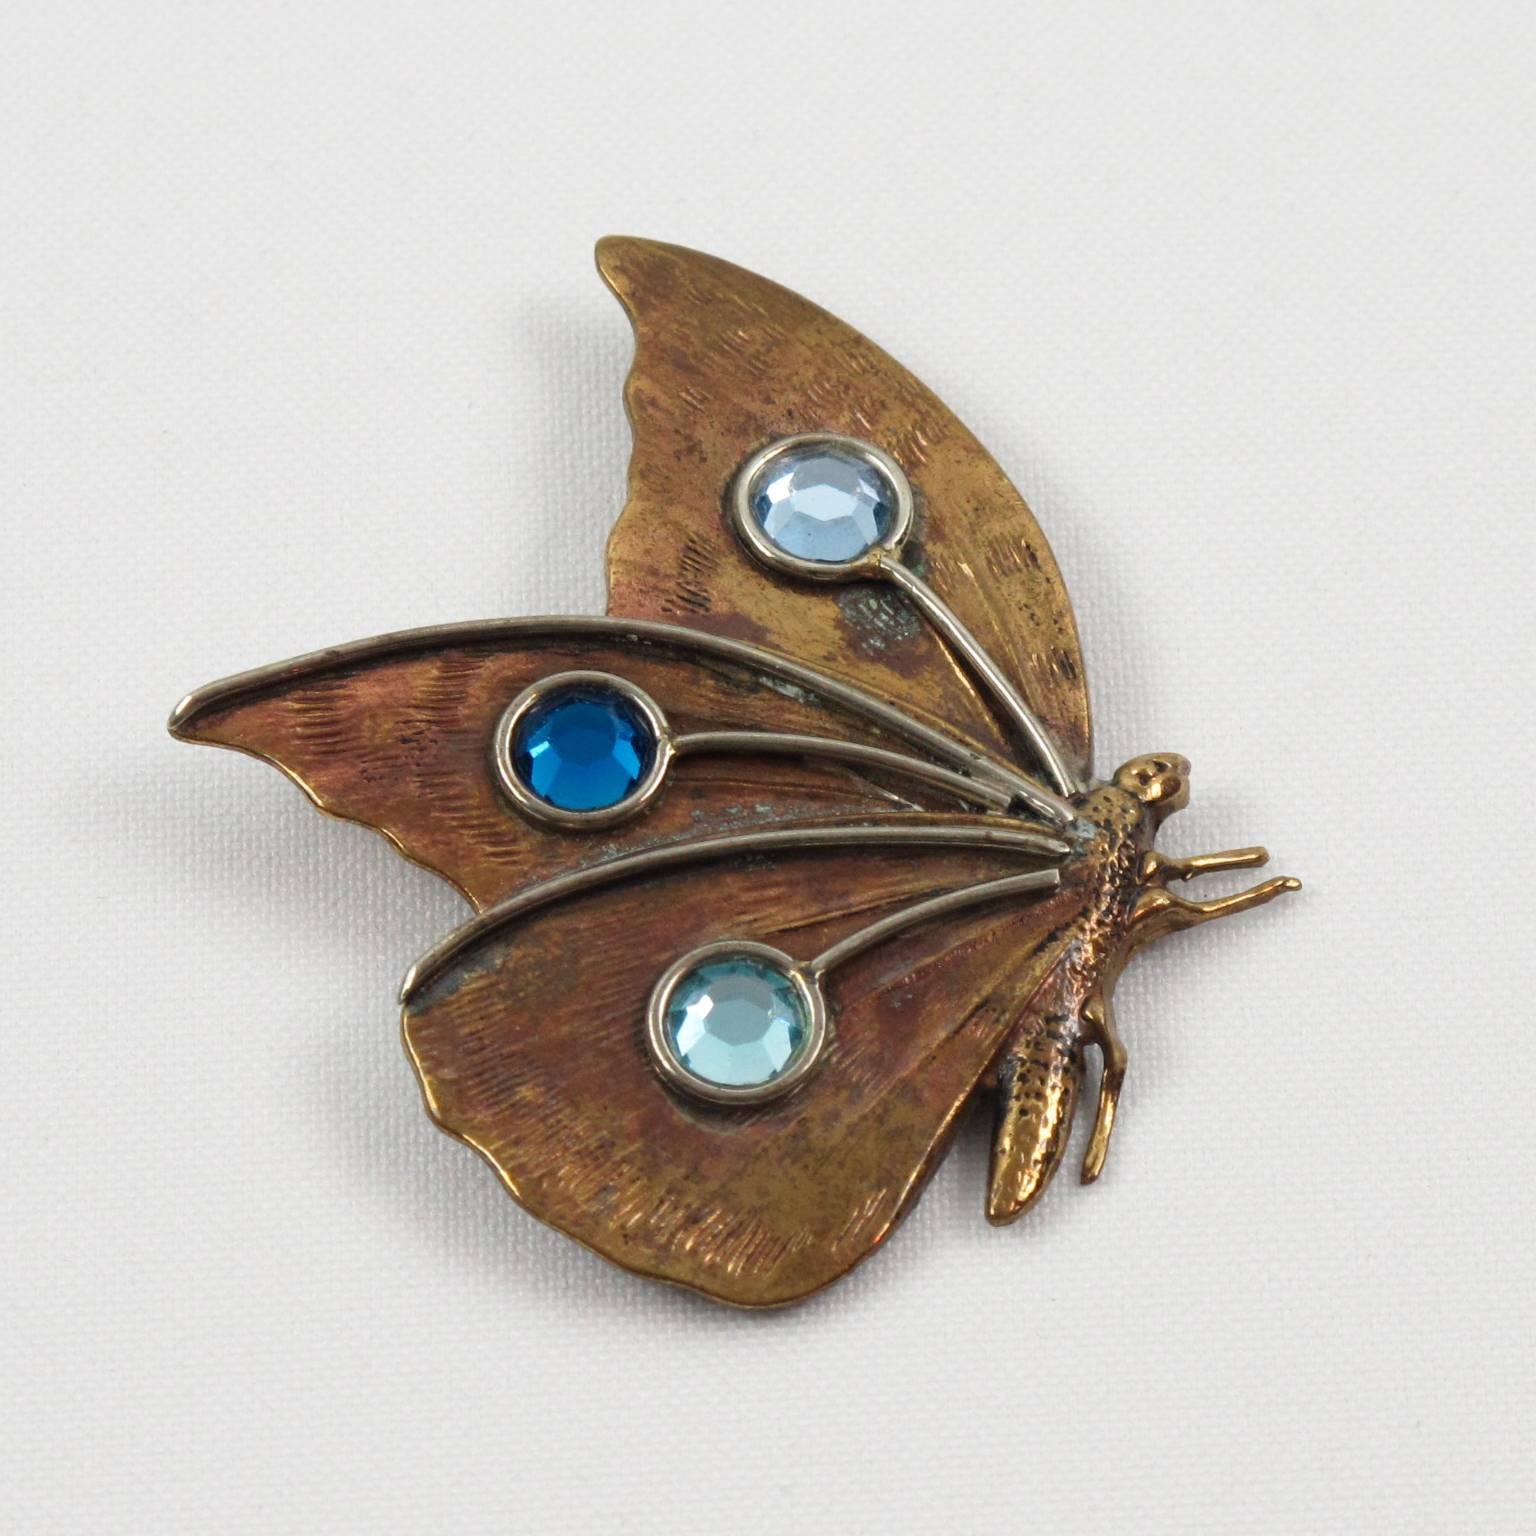 Designer Fabrice Paris signed Pin Brooch. Featuring a dimensional huge butterfly in copper, with metal all textured topped with cobalt blue and light blue rhinestones. Security closing clasp. Signed underside: 